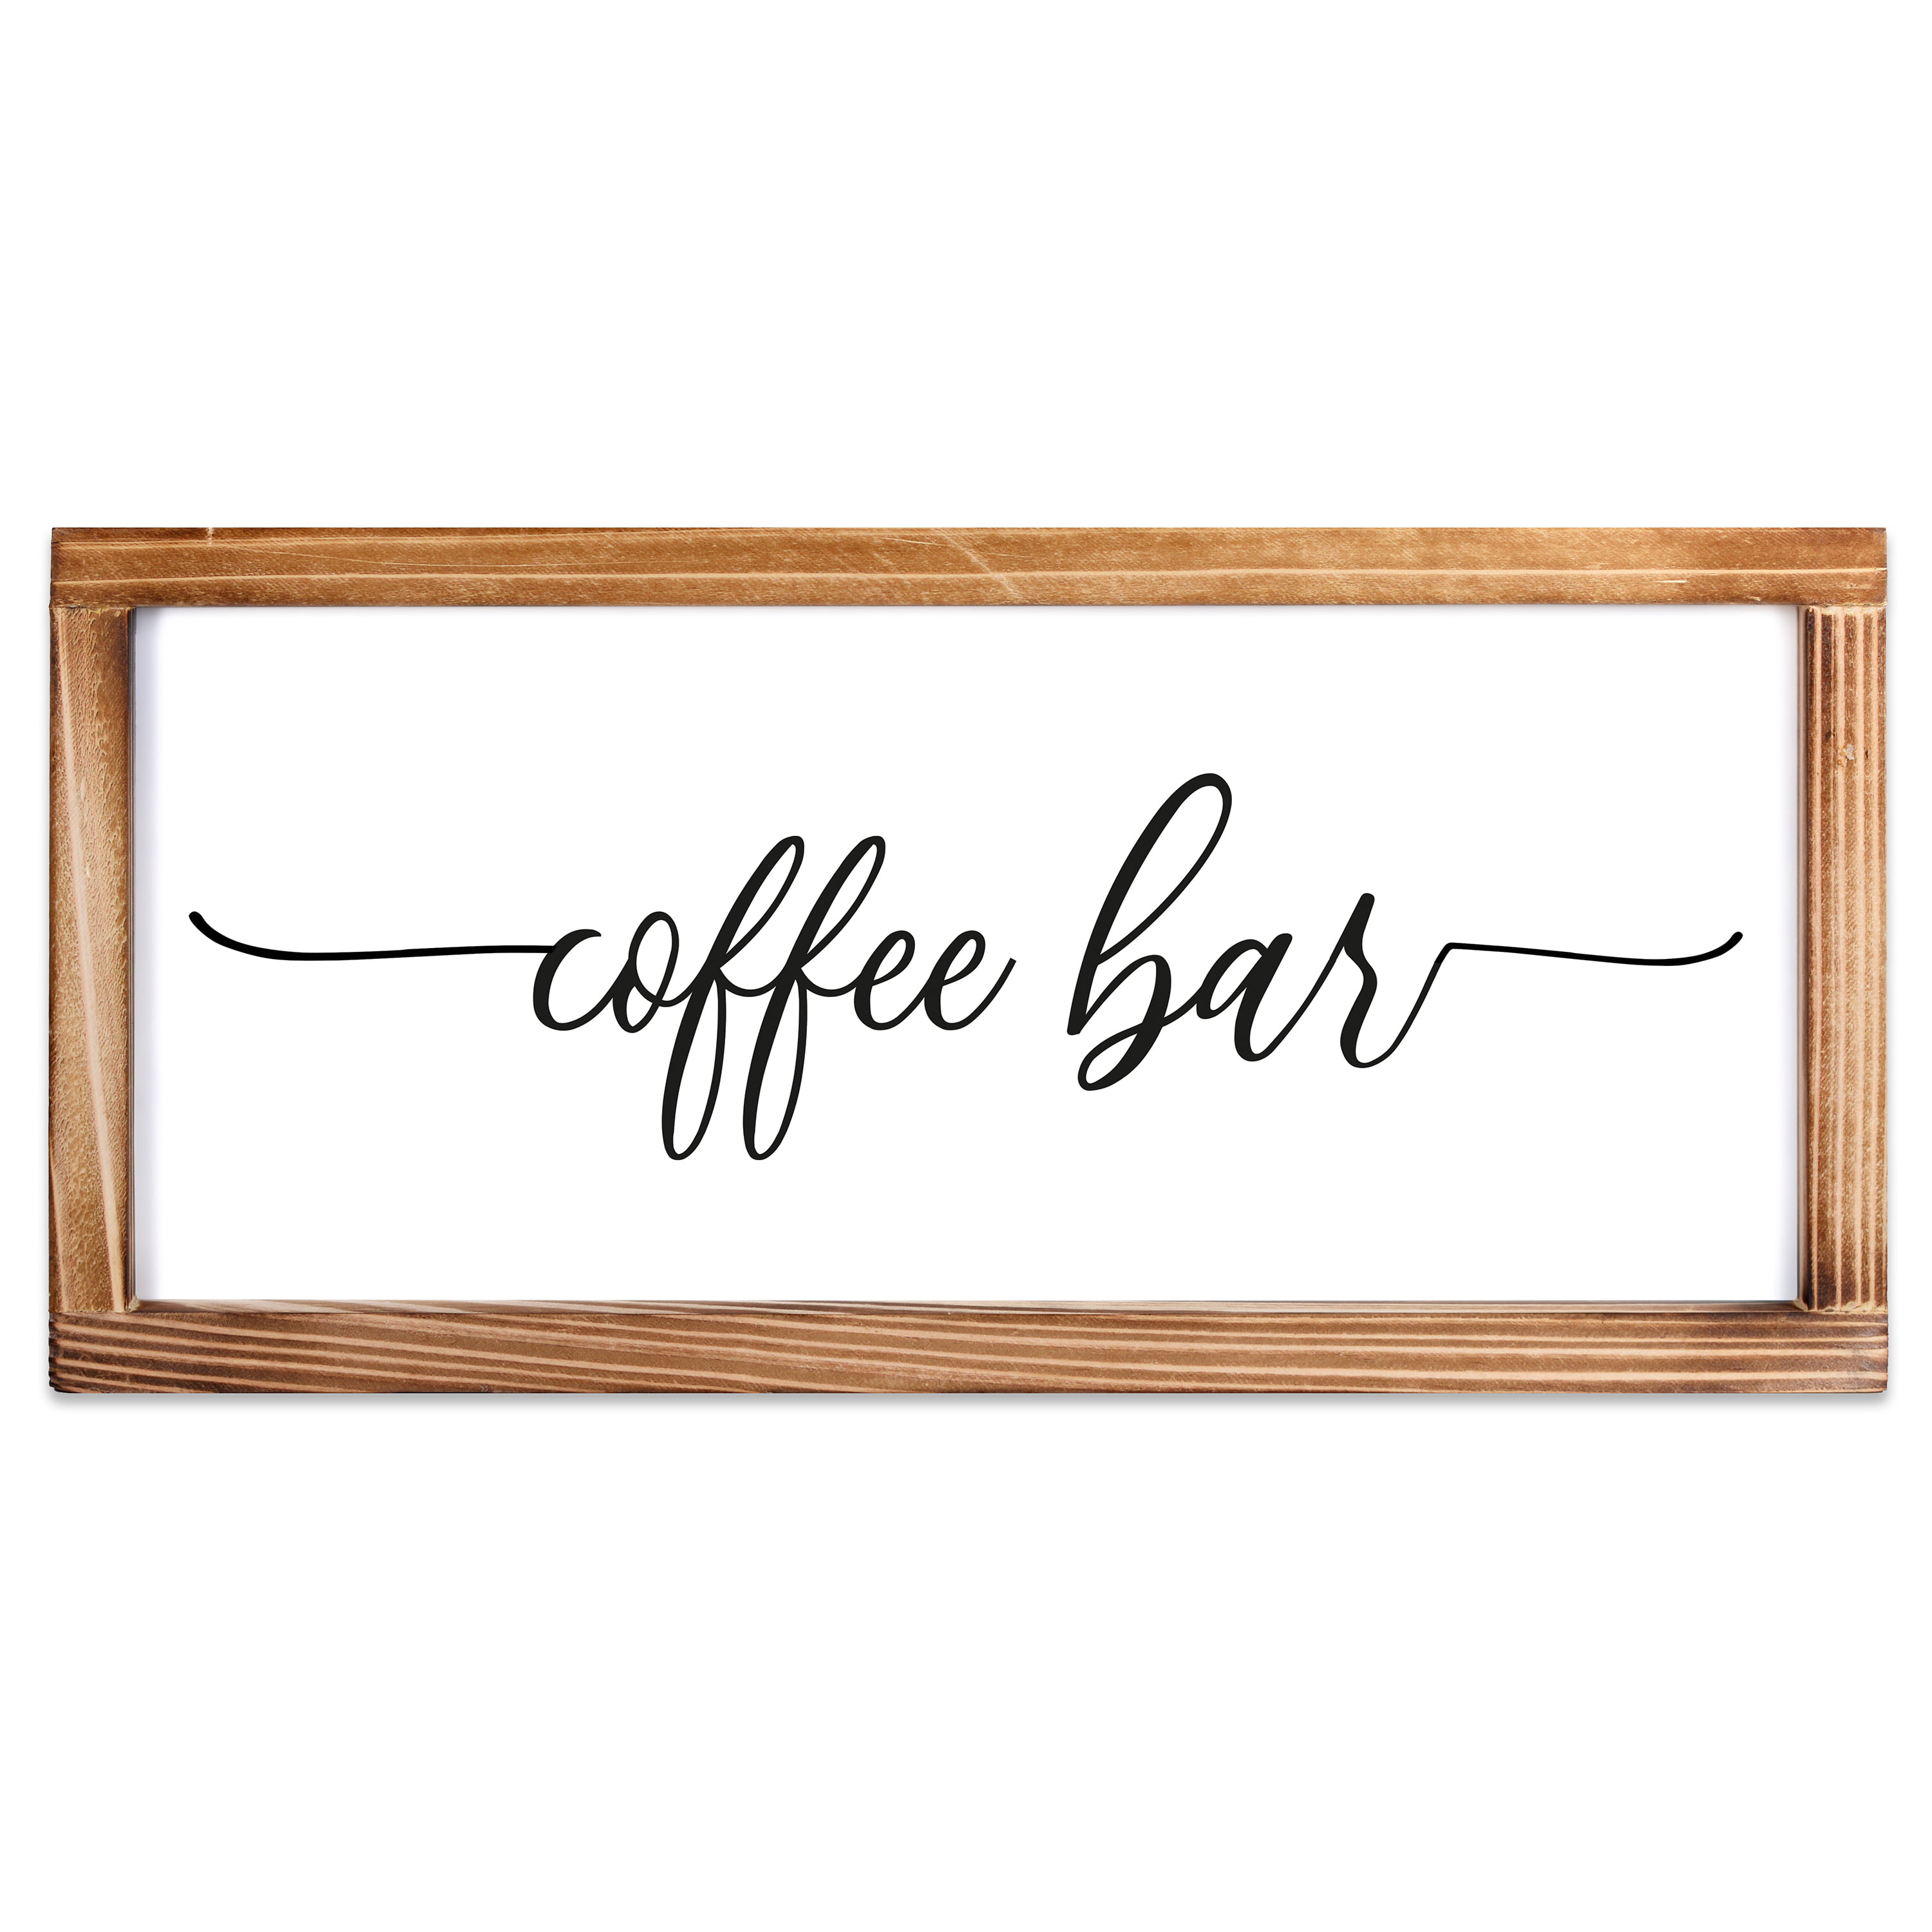 SP0383 VIKINGS BOULEVARD Street Sign Bar Store Shop Cafe Home Chic Wall Decor 